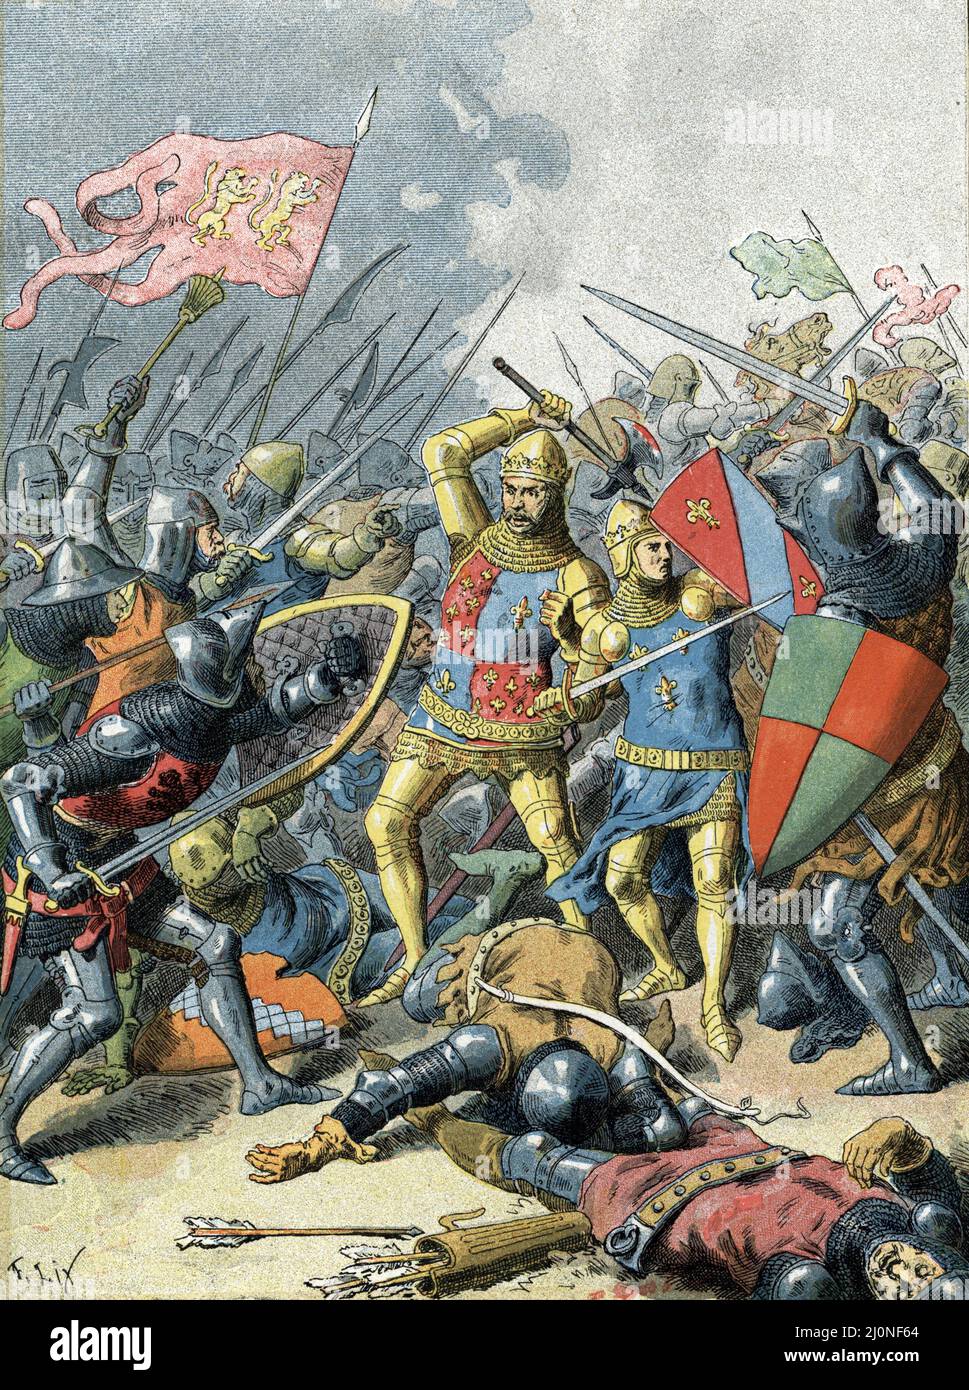 Guerre de cent ans : 'Le roi Jean II le Bon (1319-1364) a la bataille de Poitiers le 19 septembre 1356' ( Battle of Poitiers was fought between a French army commanded by King John II and an Anglo-Gascon force under Edward, the Black Prince, on 19 September 1356 during the Hundred Years' War) Gravure tiree de 'La France a travers les siecles' de Witt 1897 Collection privee Stock Photo